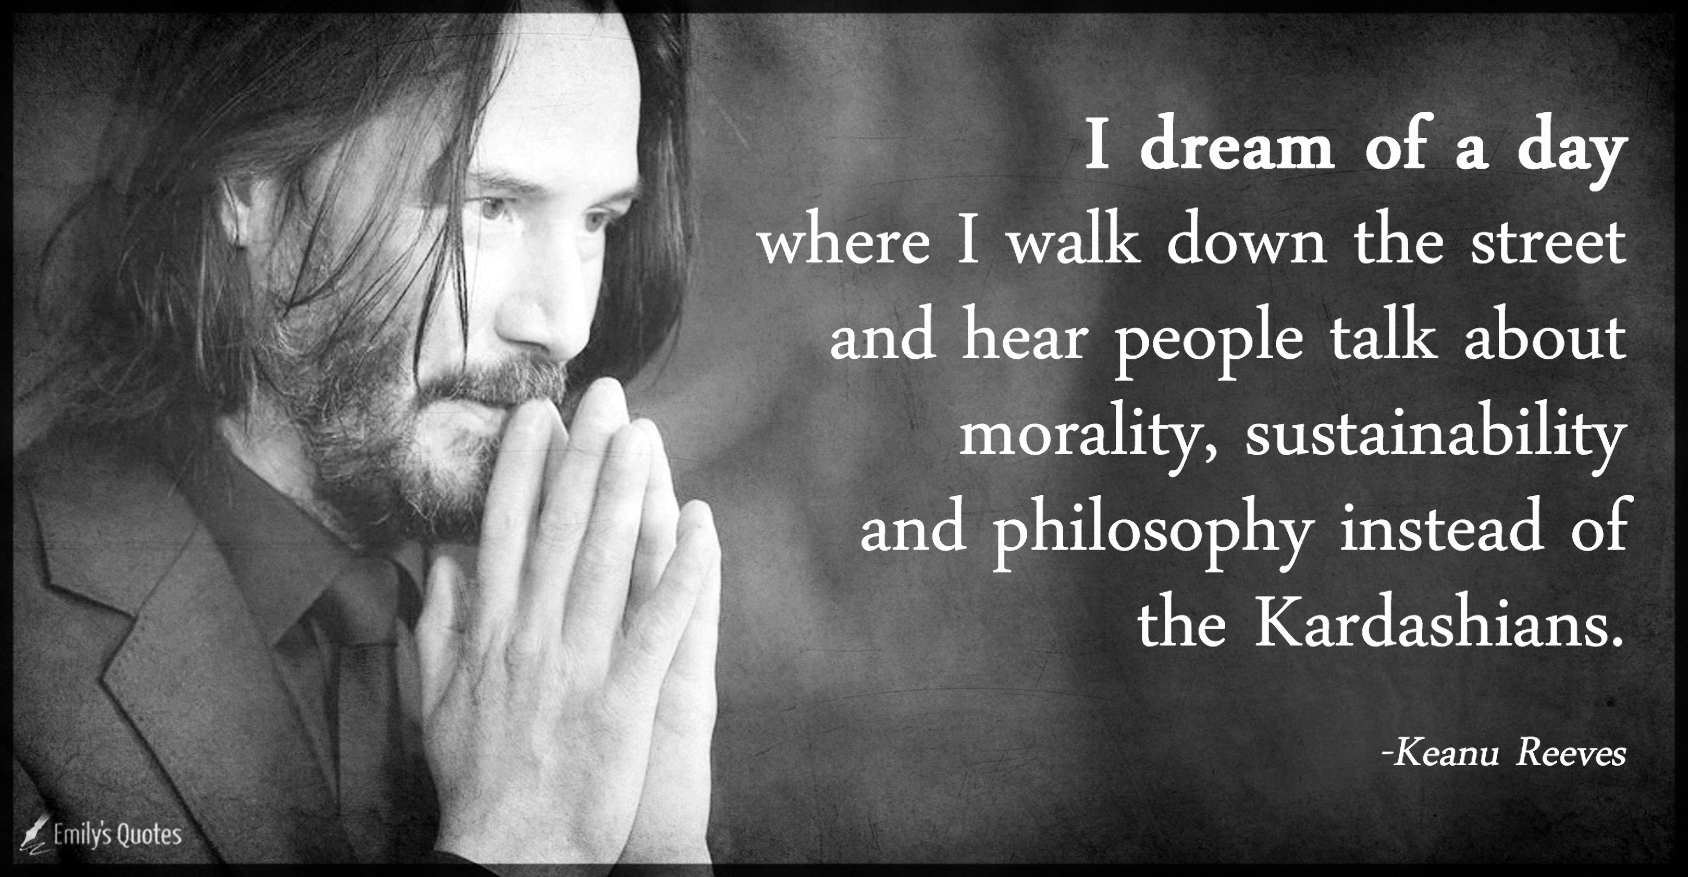 I dream of a day where I walk down the street and hear people talk about morality